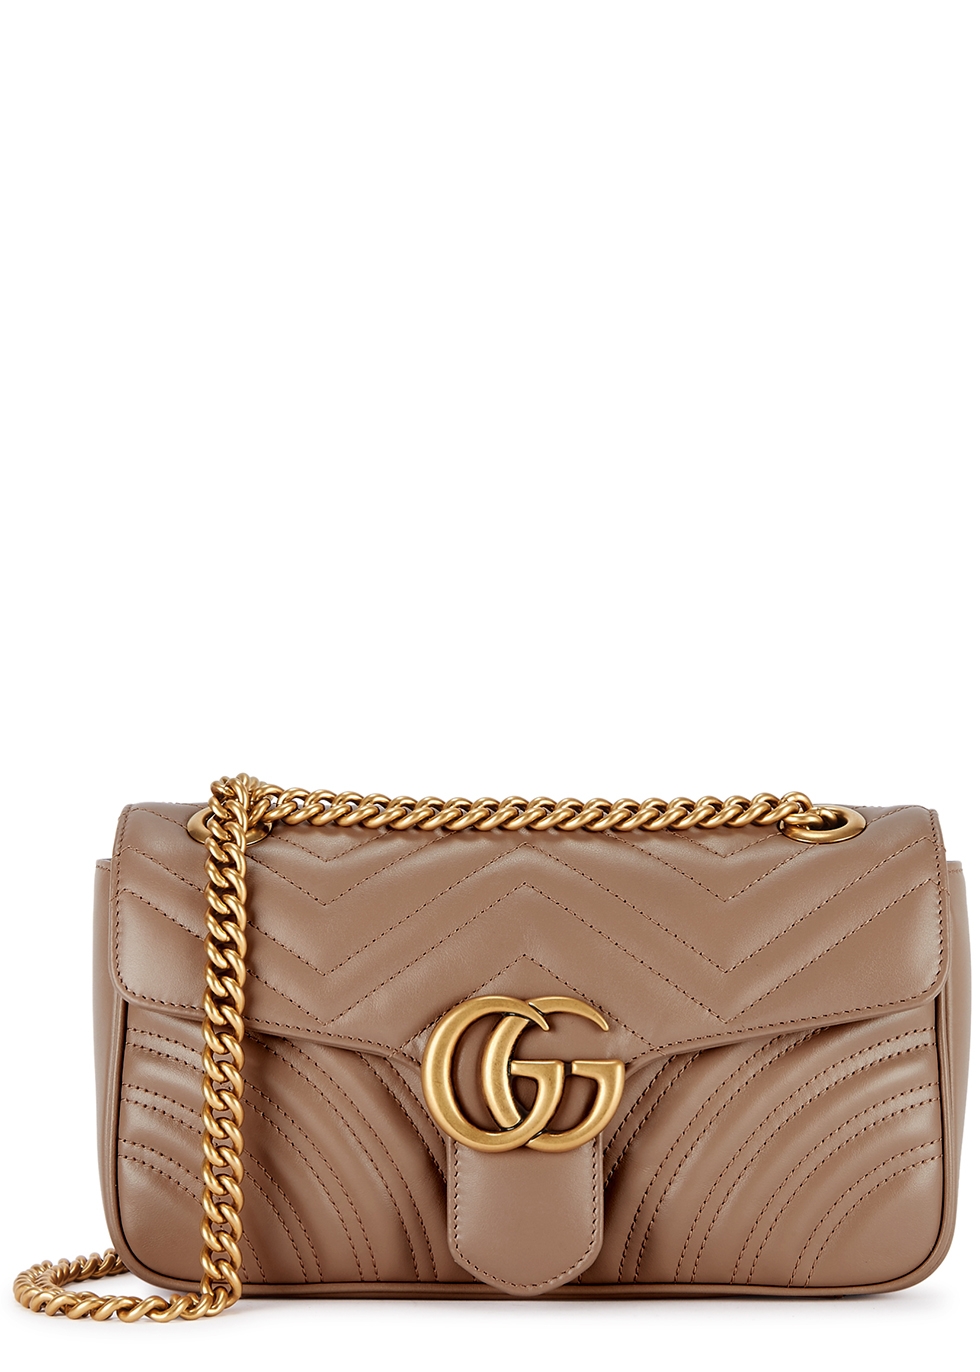 gucci marmont small leather shoulder bag